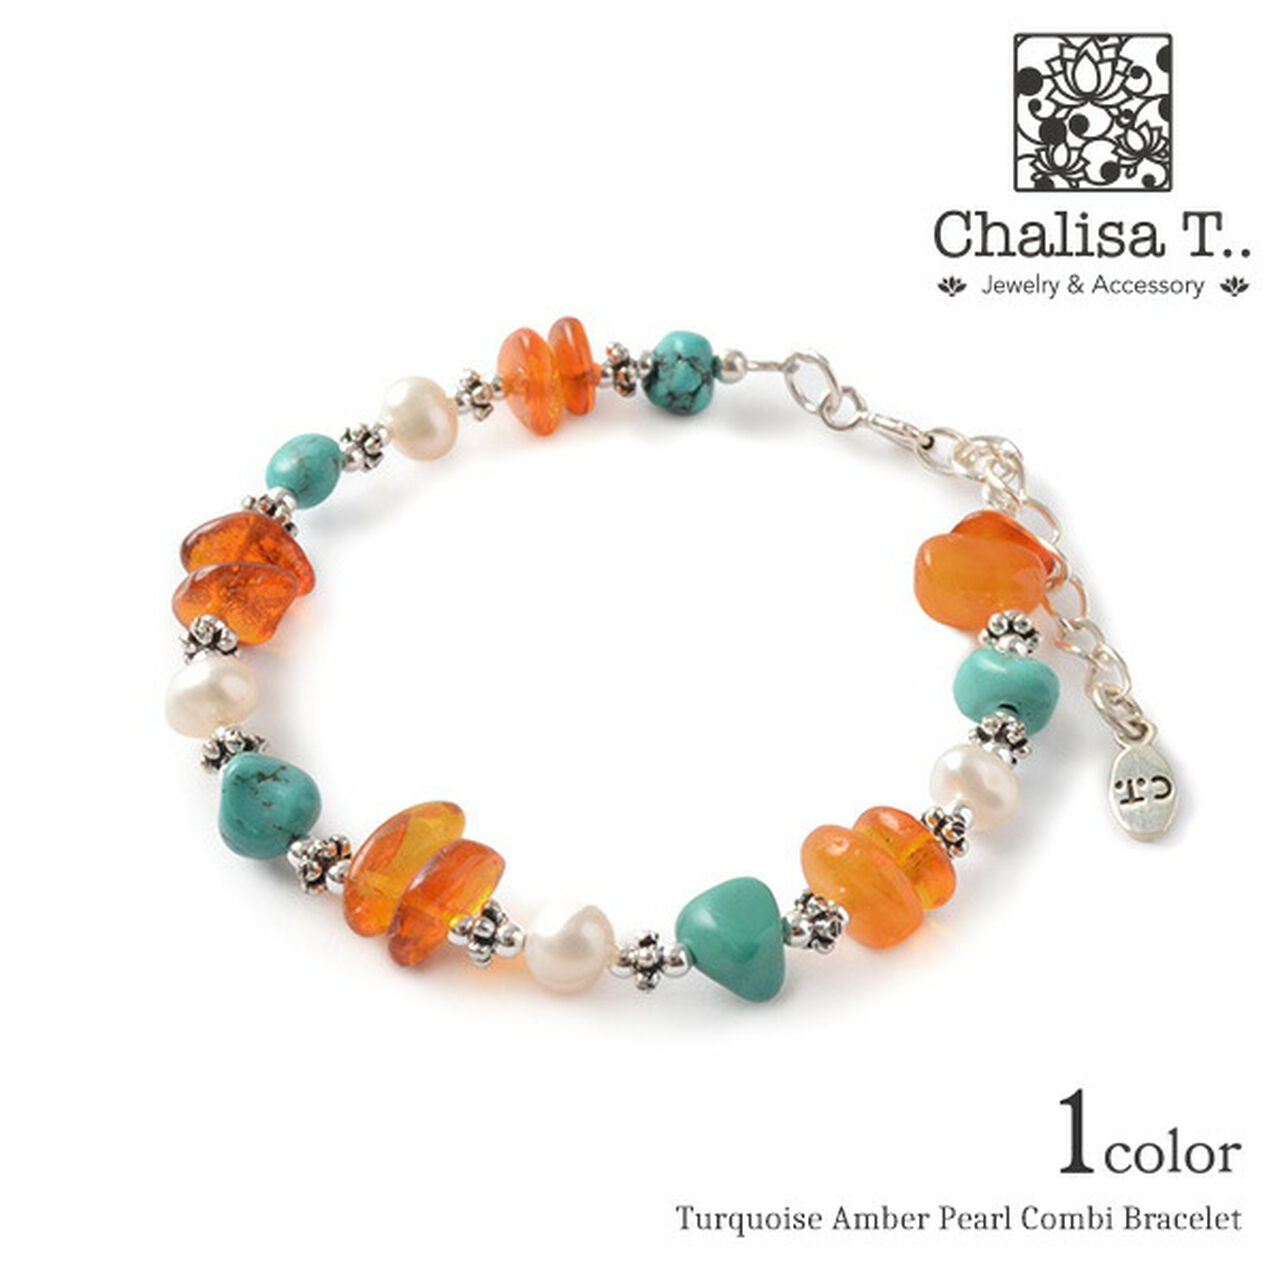 Turquoise Amber Pearl Combi Bracelet,, large image number 0